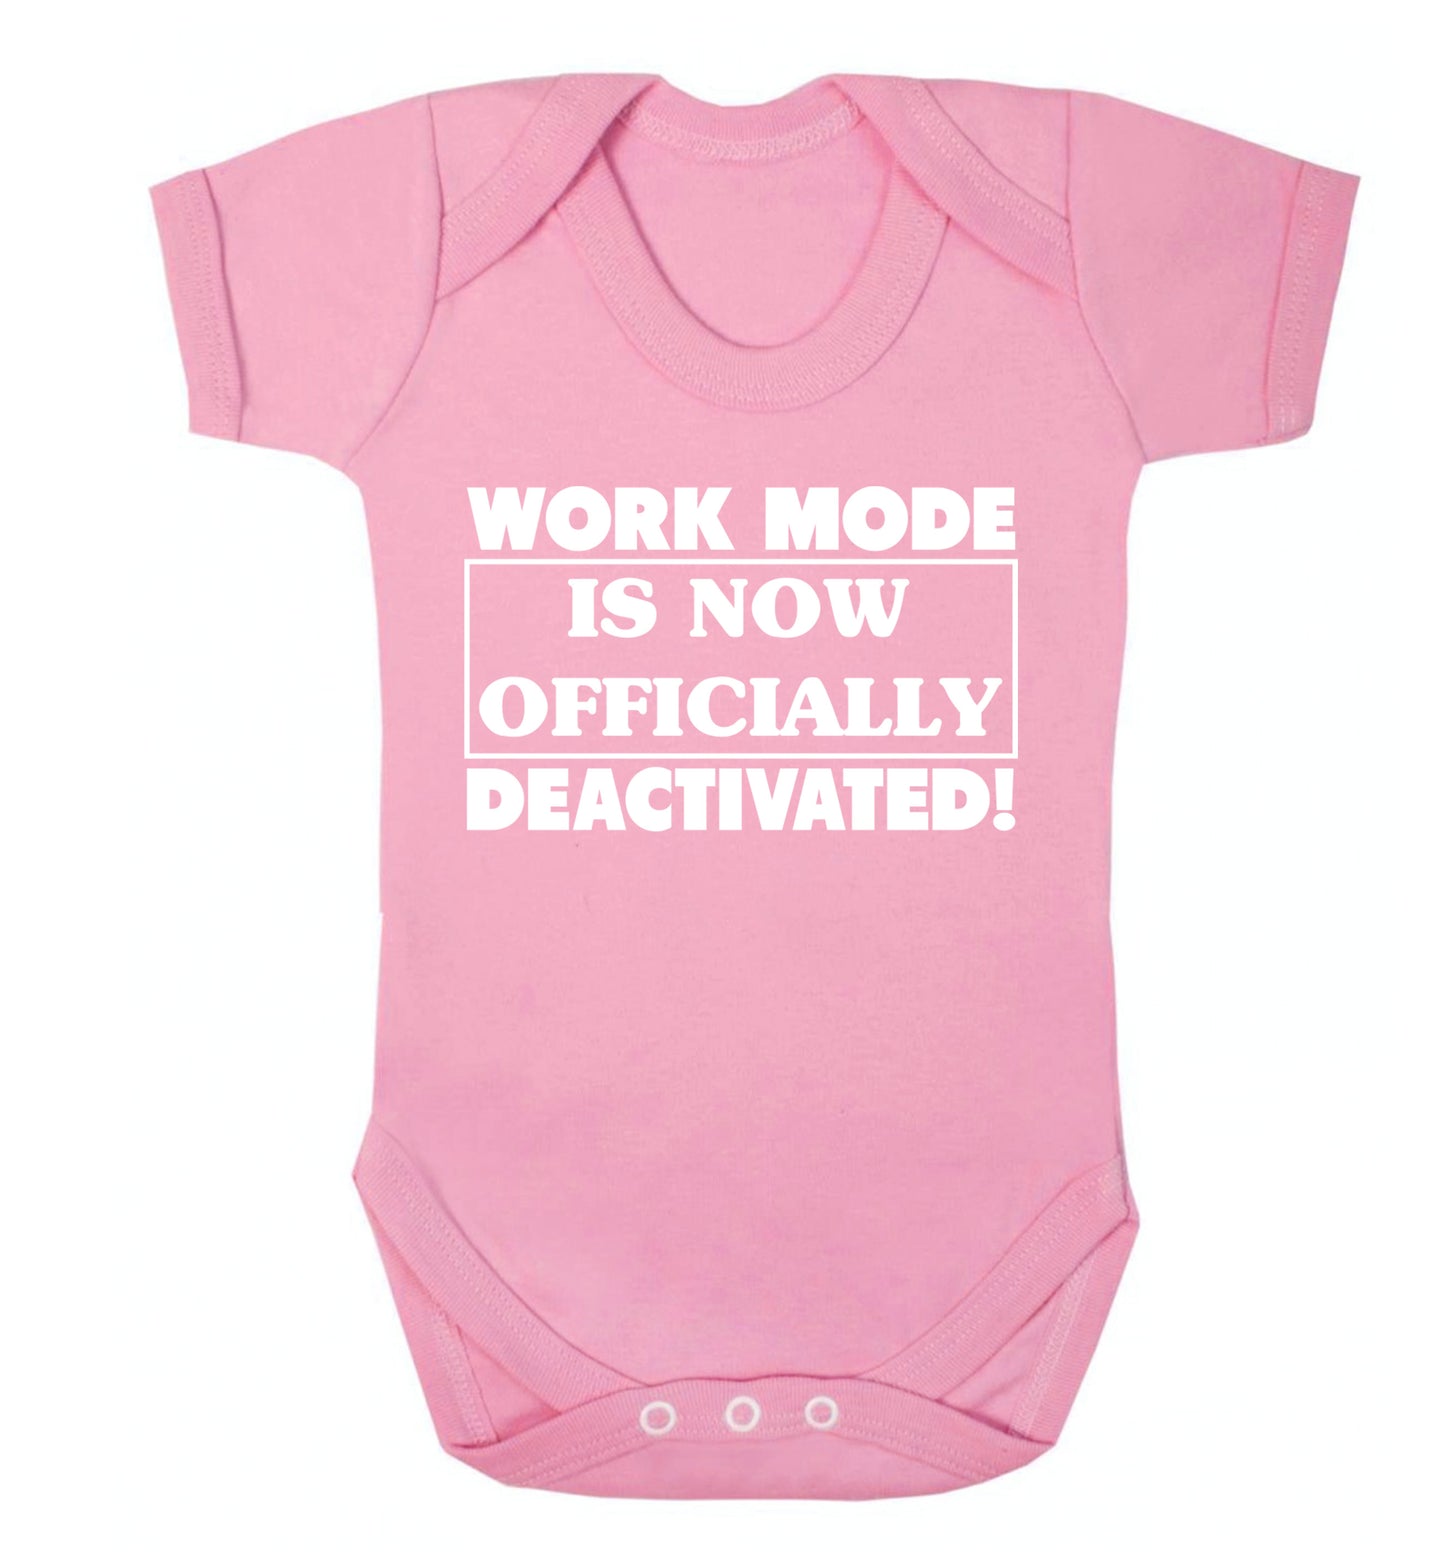 Work mode is now officially deactivated Baby Vest pale pink 18-24 months